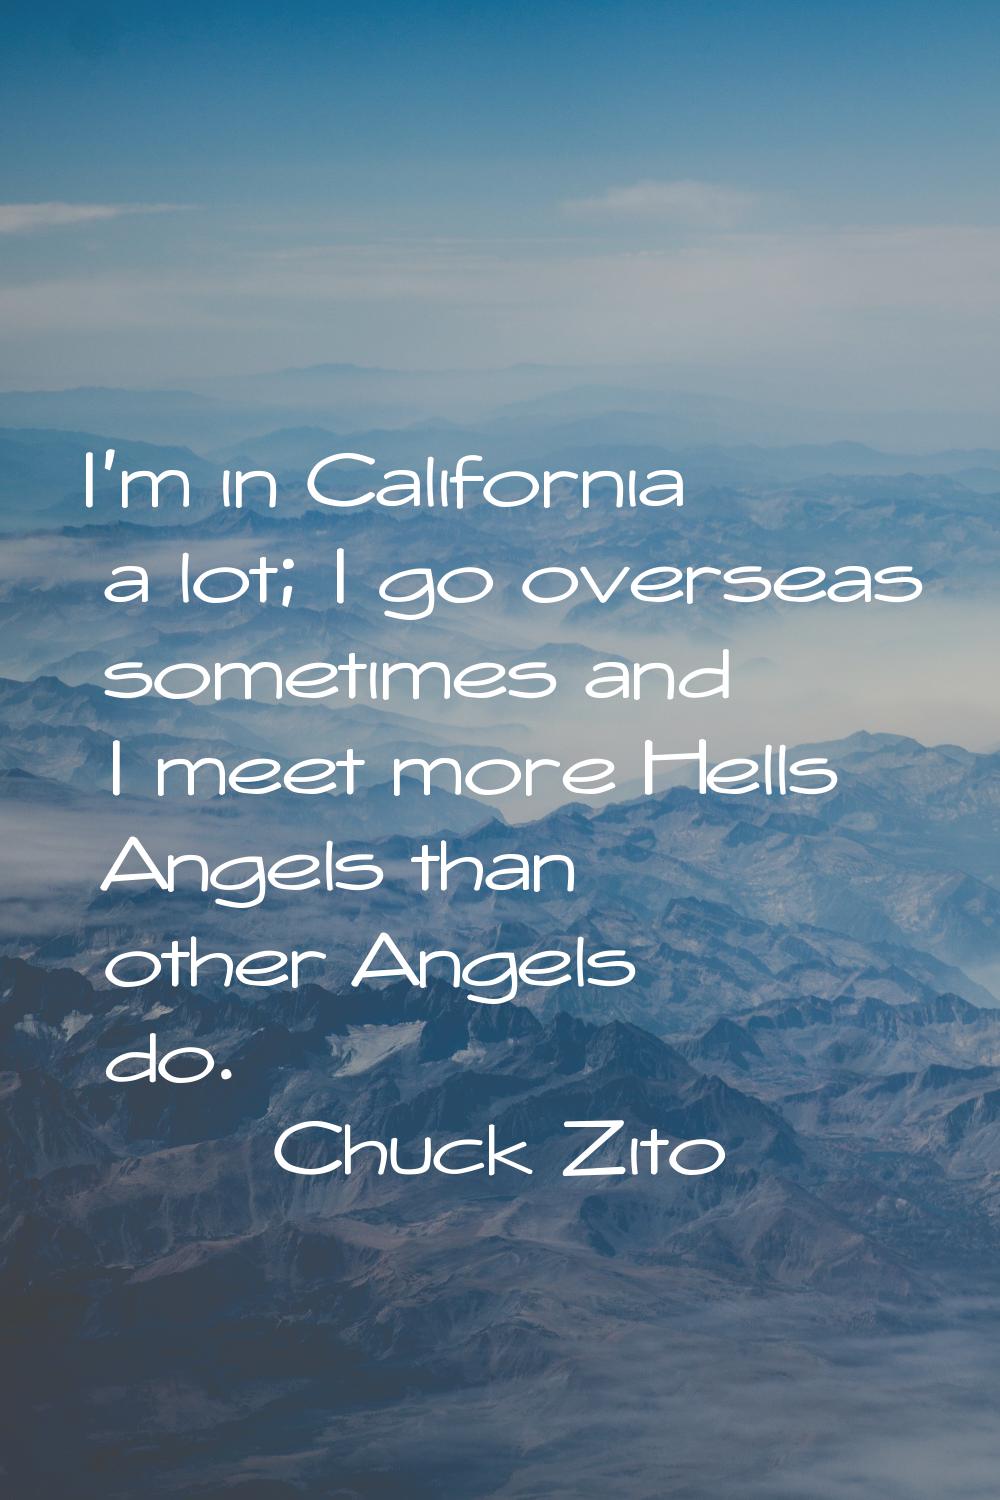 I'm in California a lot; I go overseas sometimes and I meet more Hells Angels than other Angels do.